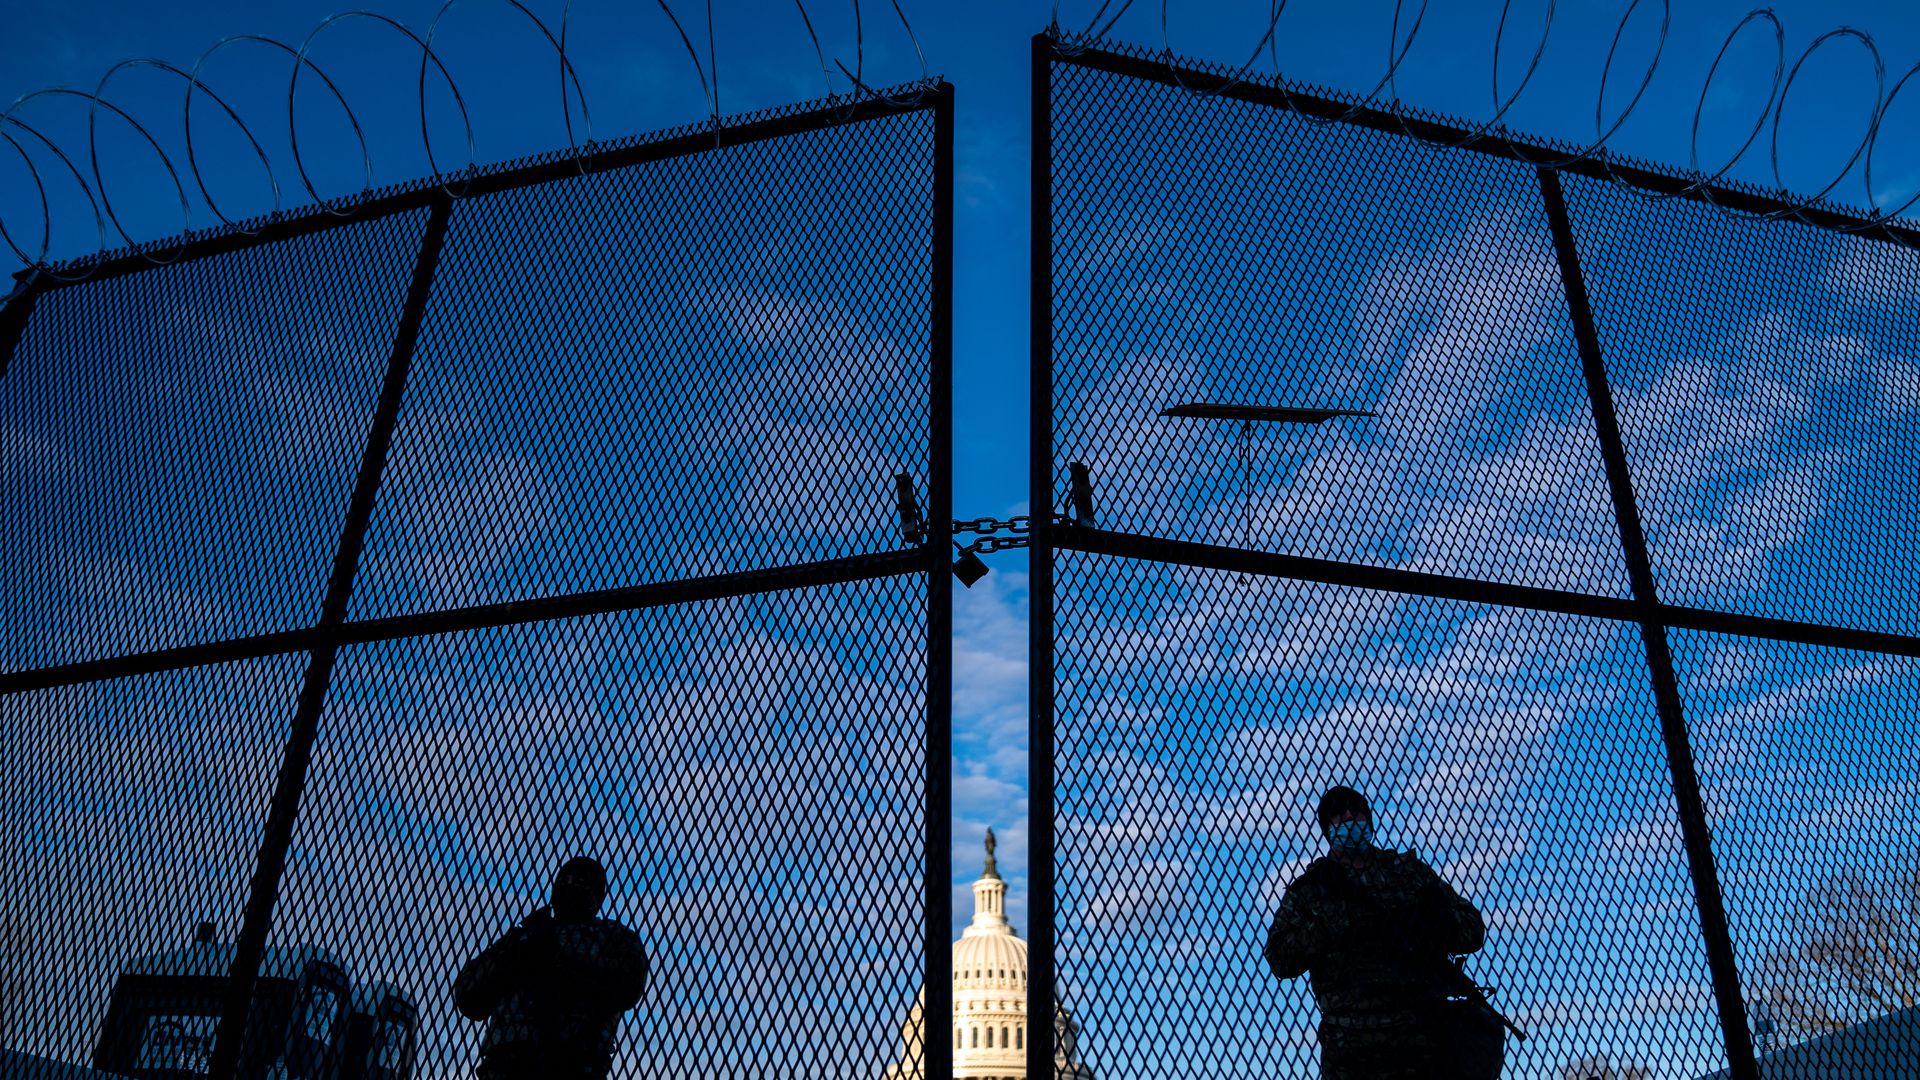 National Guardsmen and a tall fence are seen protecting the U.S. Capitol in the background.